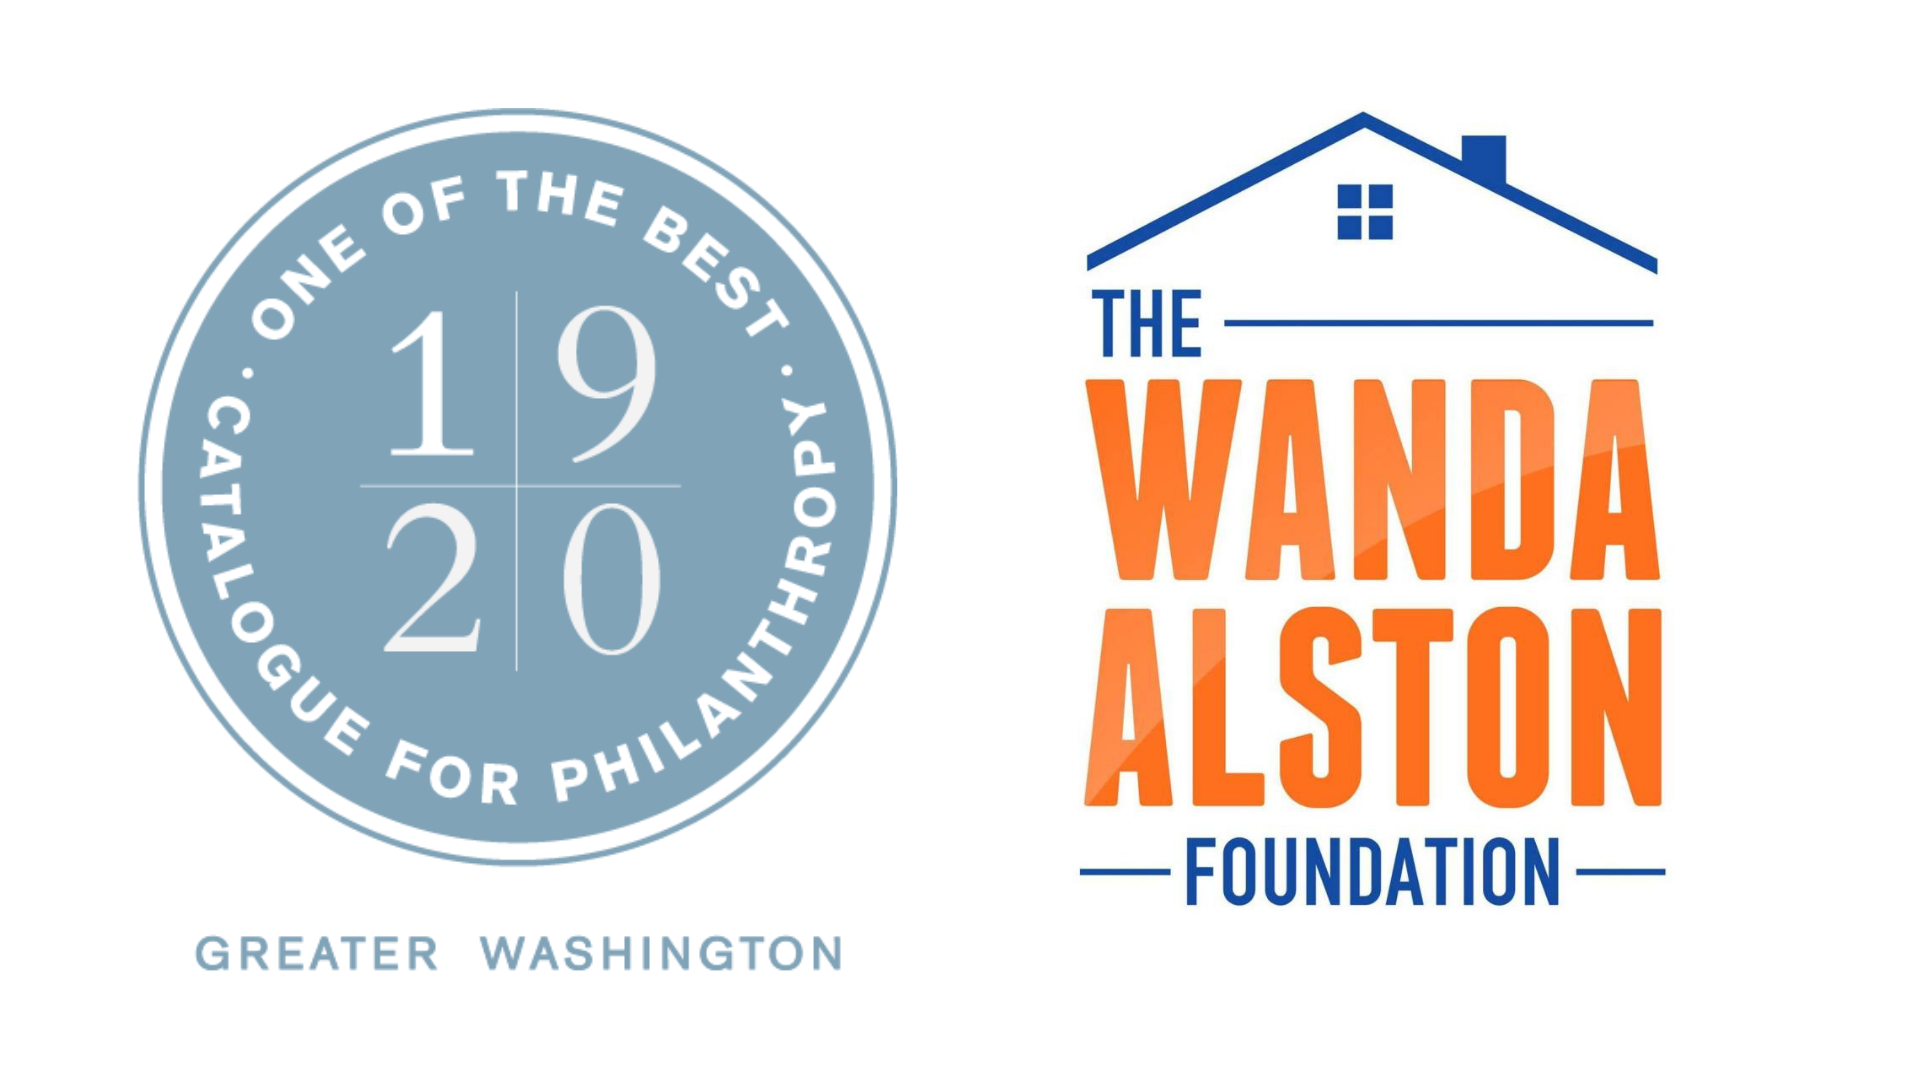 The Wanda Alston Foundation Named ‘One of the Best’ Nonprofits by the Catalogue for Philanthropy